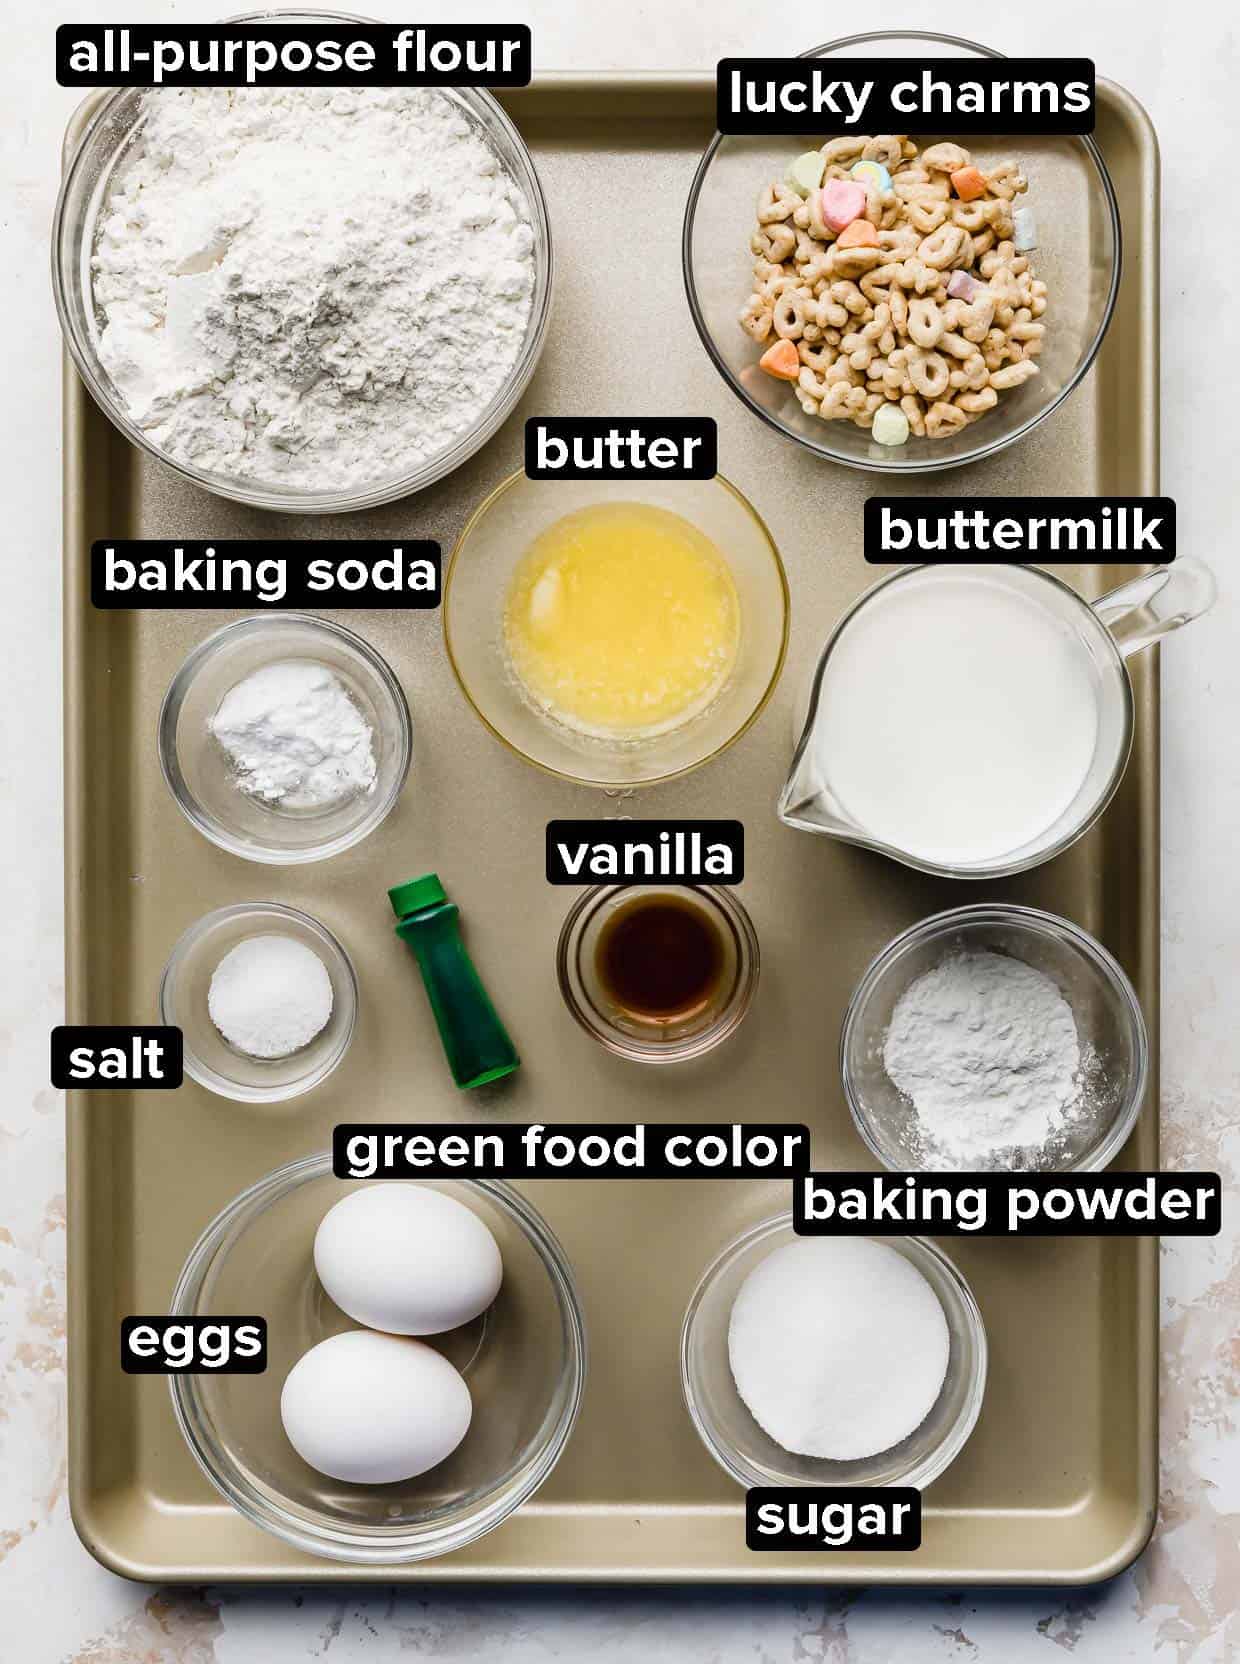 Ingredients used to make green St. Patrick's Day Pancakes portioned into glass bowls on a bronze baking sheet.